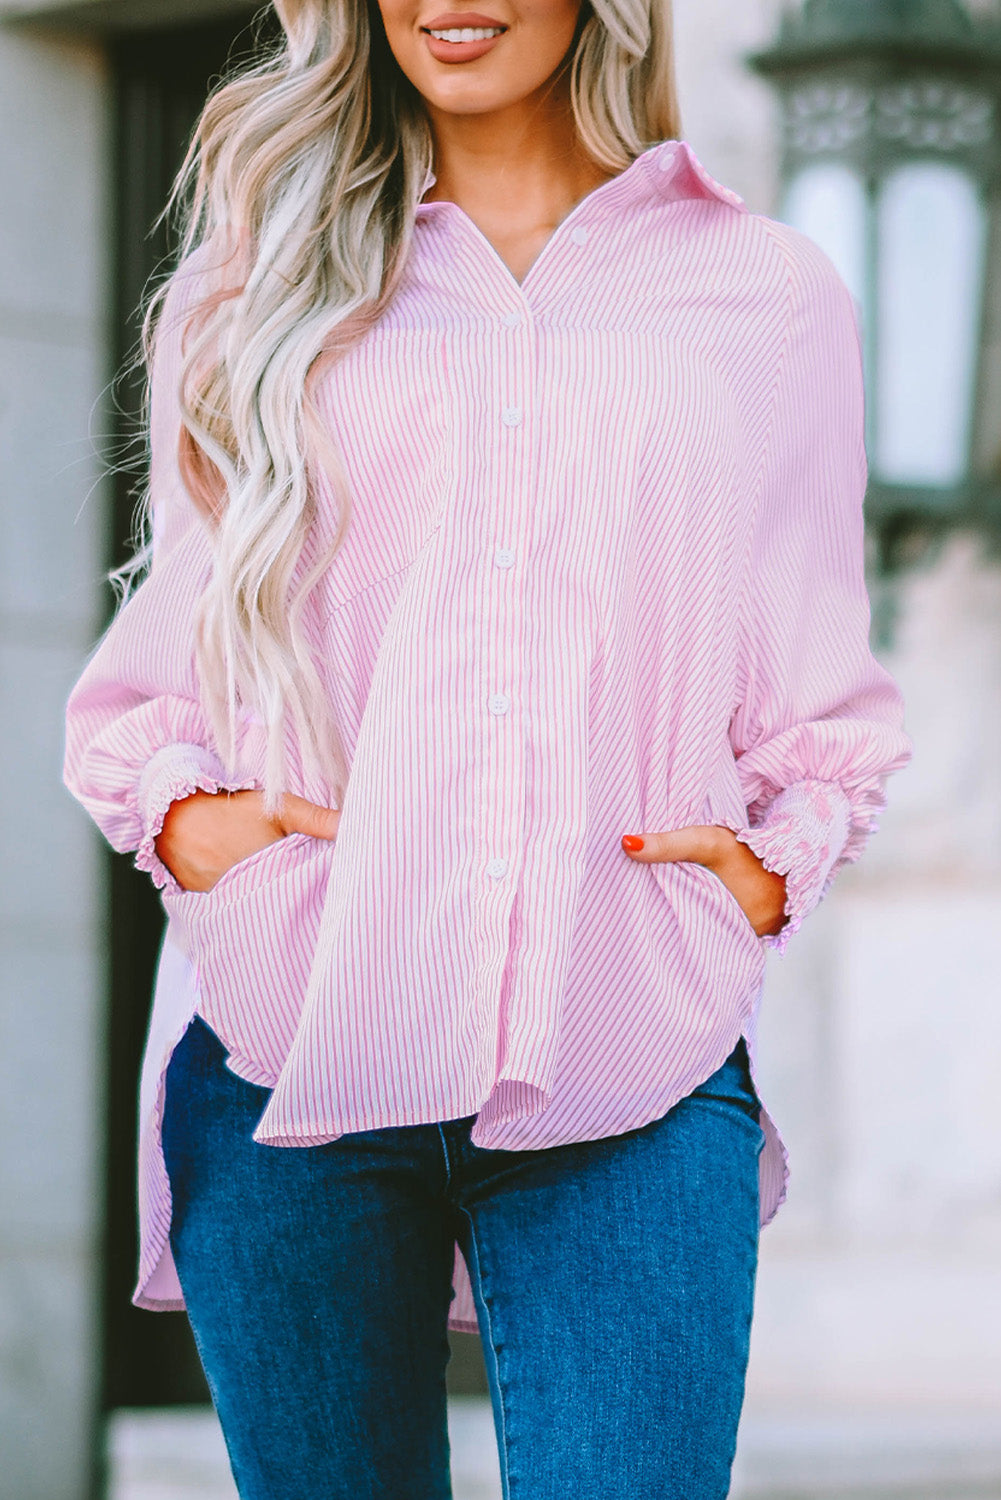 Nantucket in Pink Button-Down